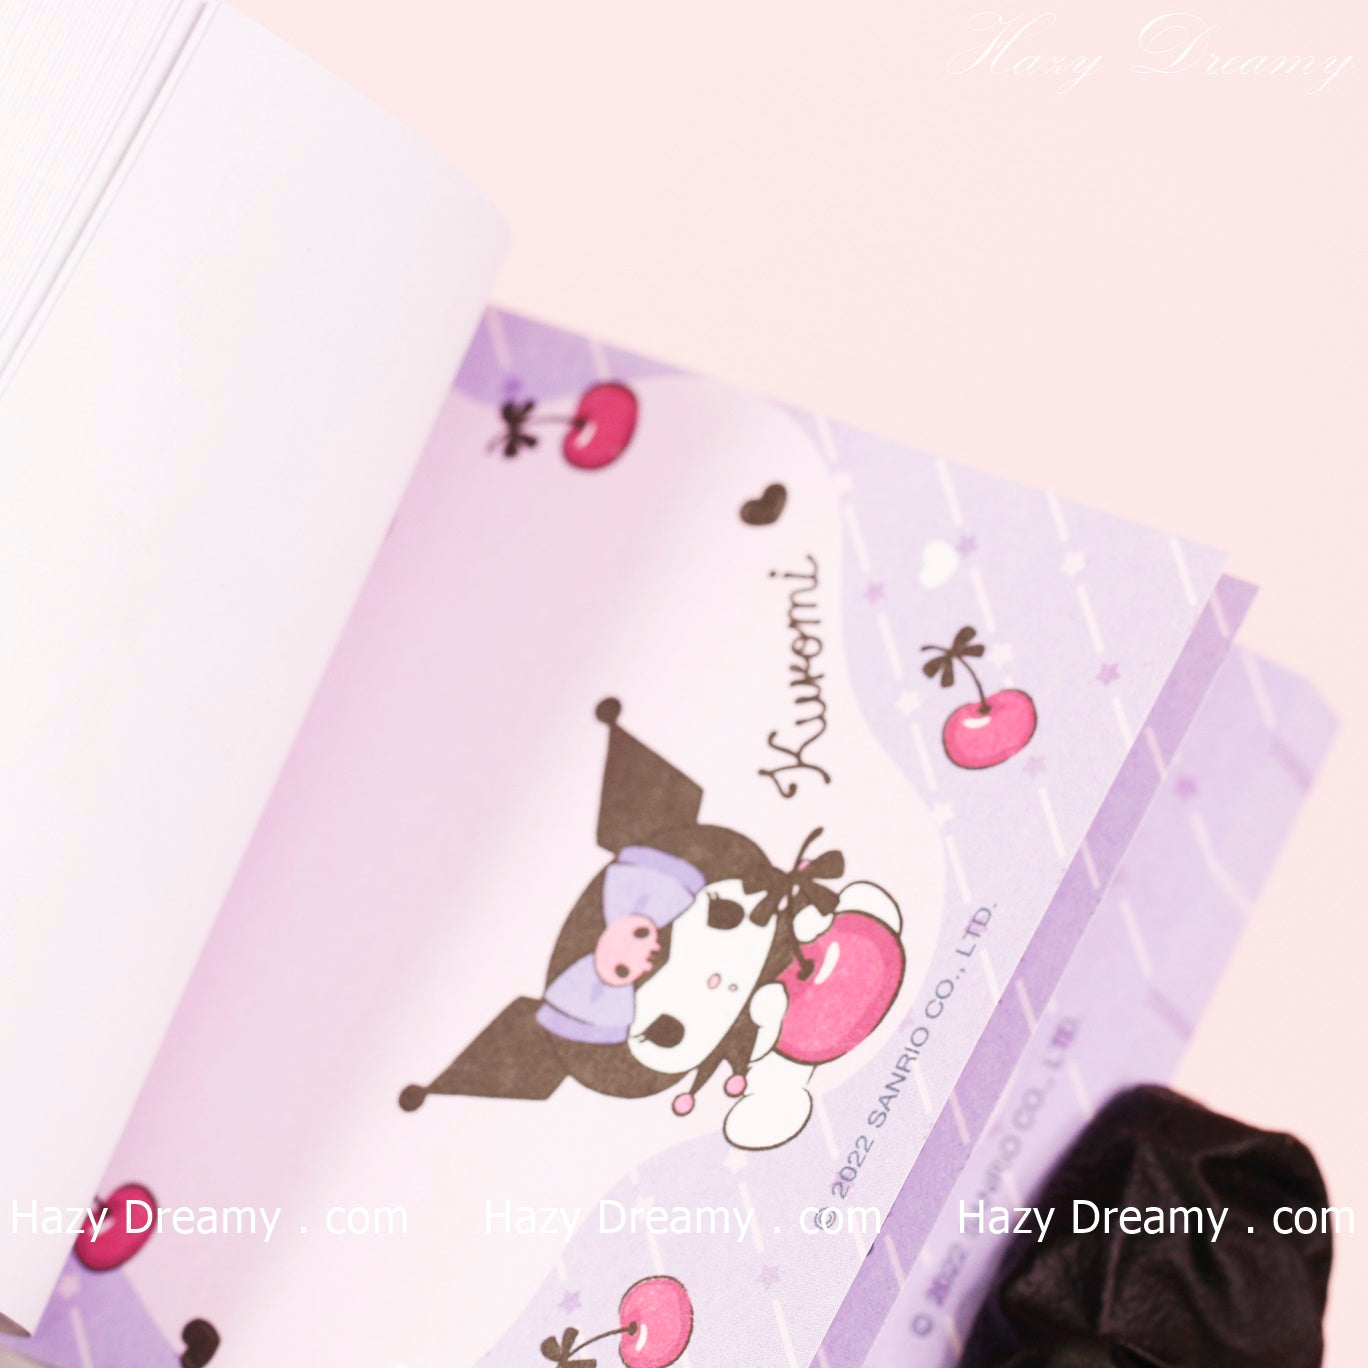 Hazy Dreamy Kuromi Sticky Notes - Cute and Functional Stationery